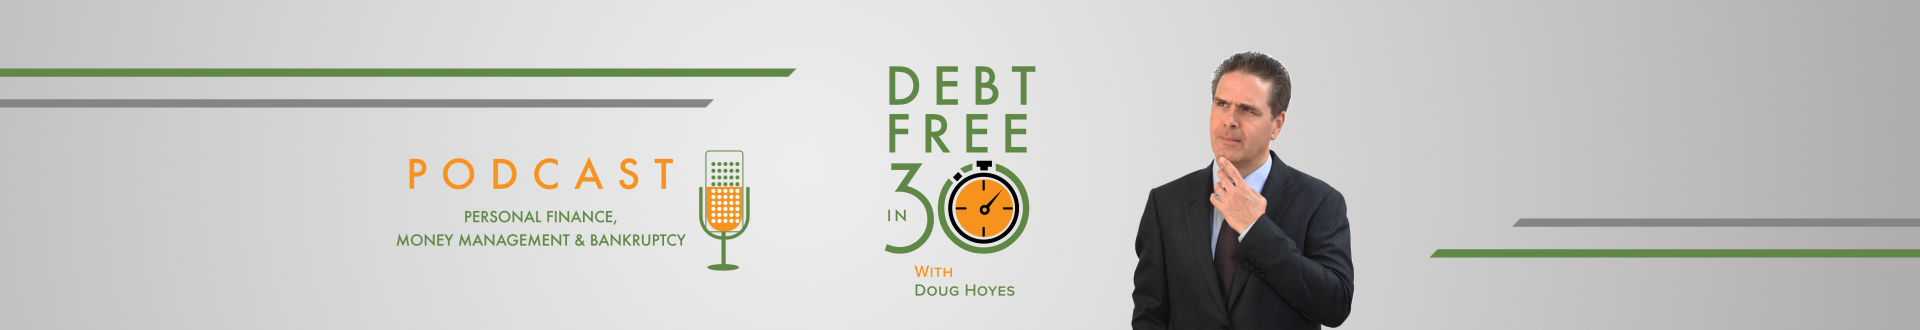 Debt Free in 30 Podcast Archive - Page 5